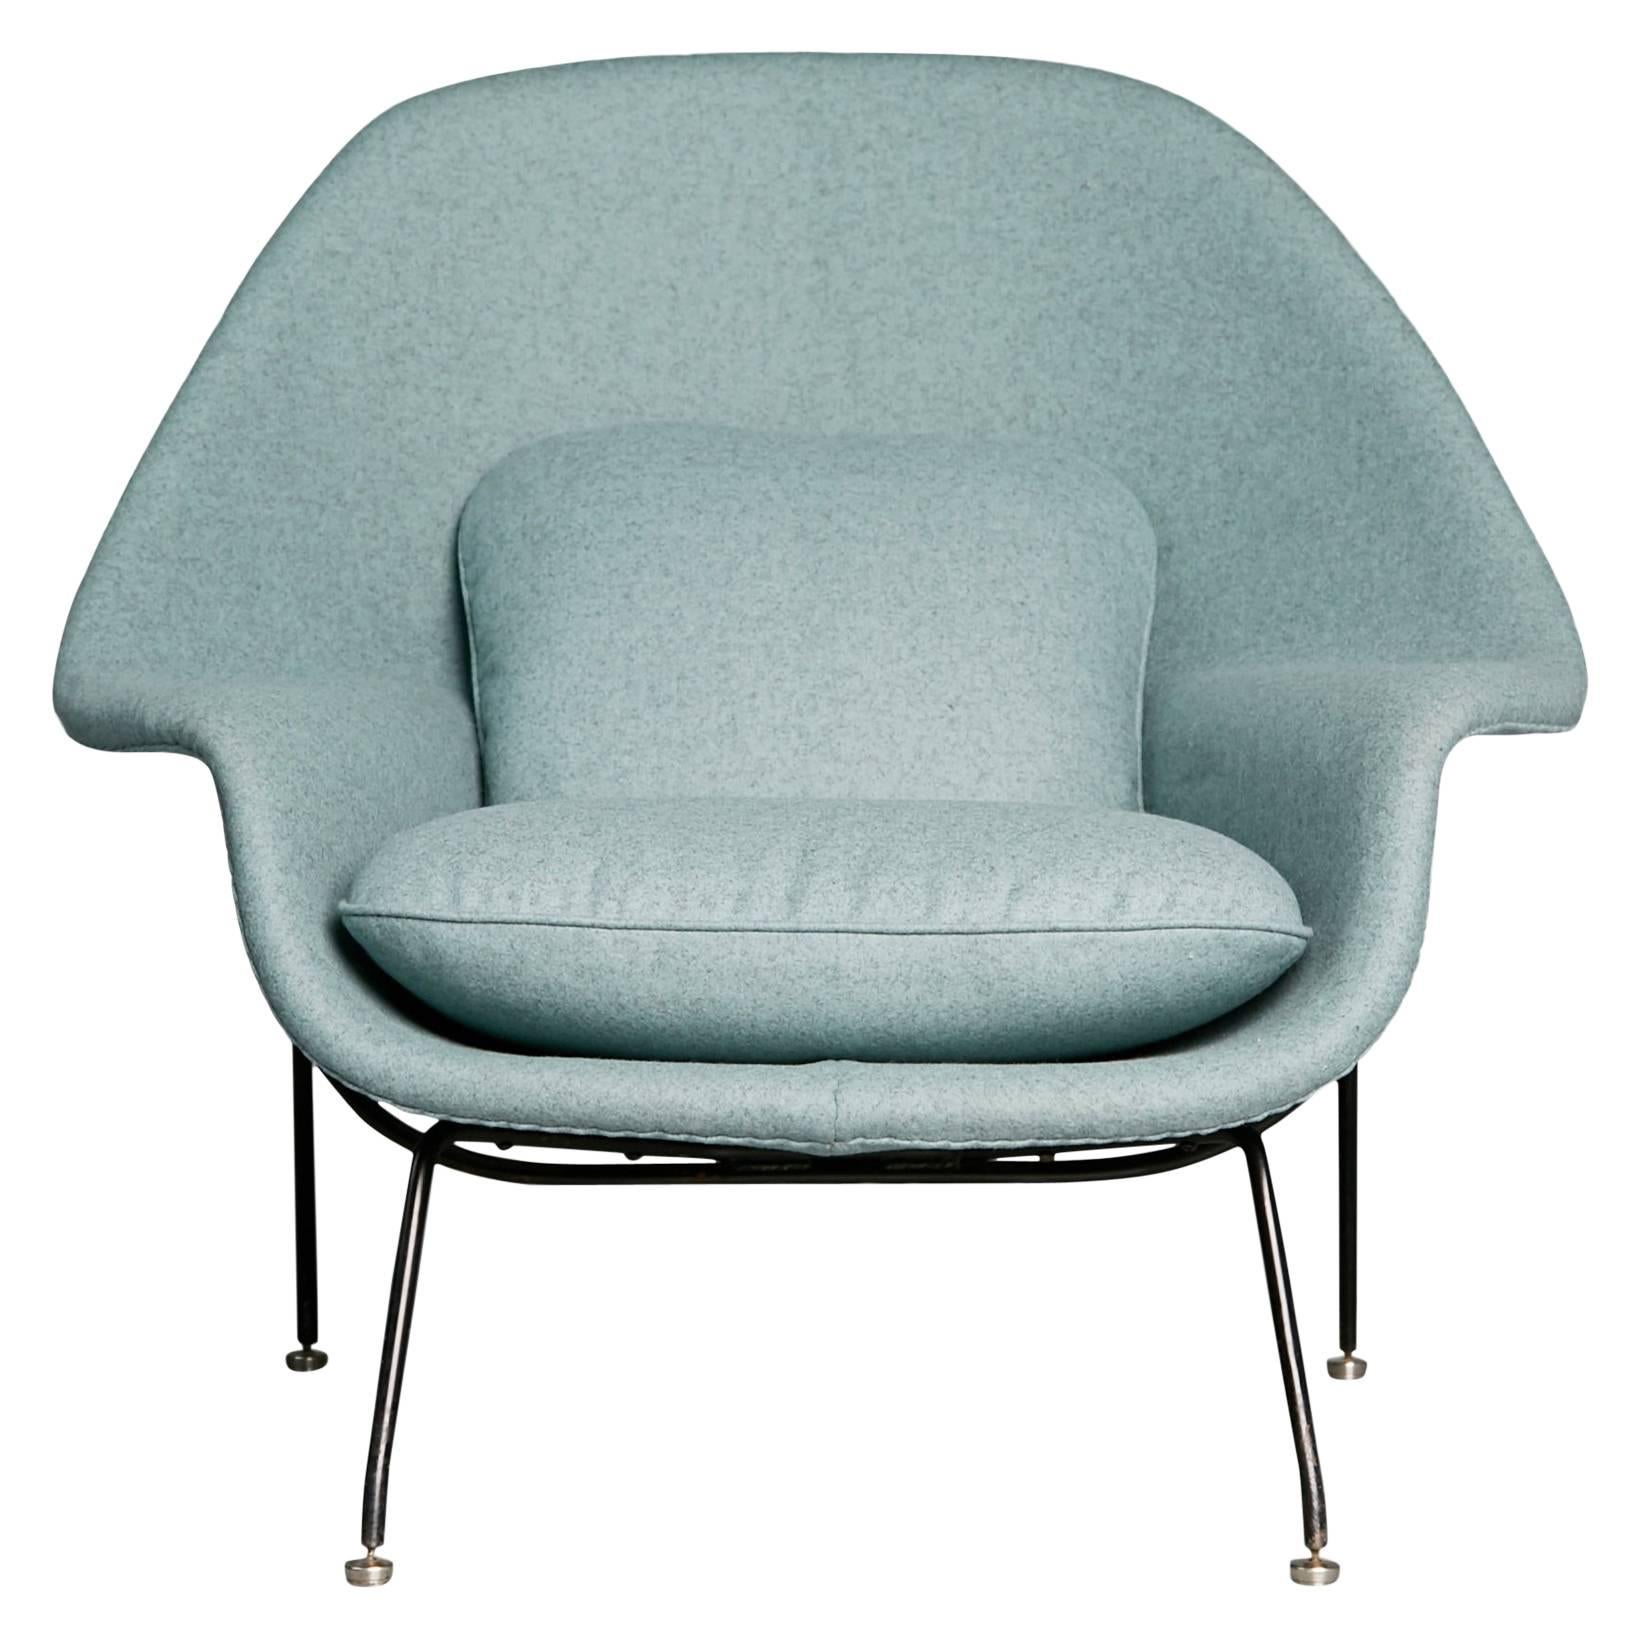 Newly Upholstered Womb Chair by Eero Saarinen for Knoll, circa 1950